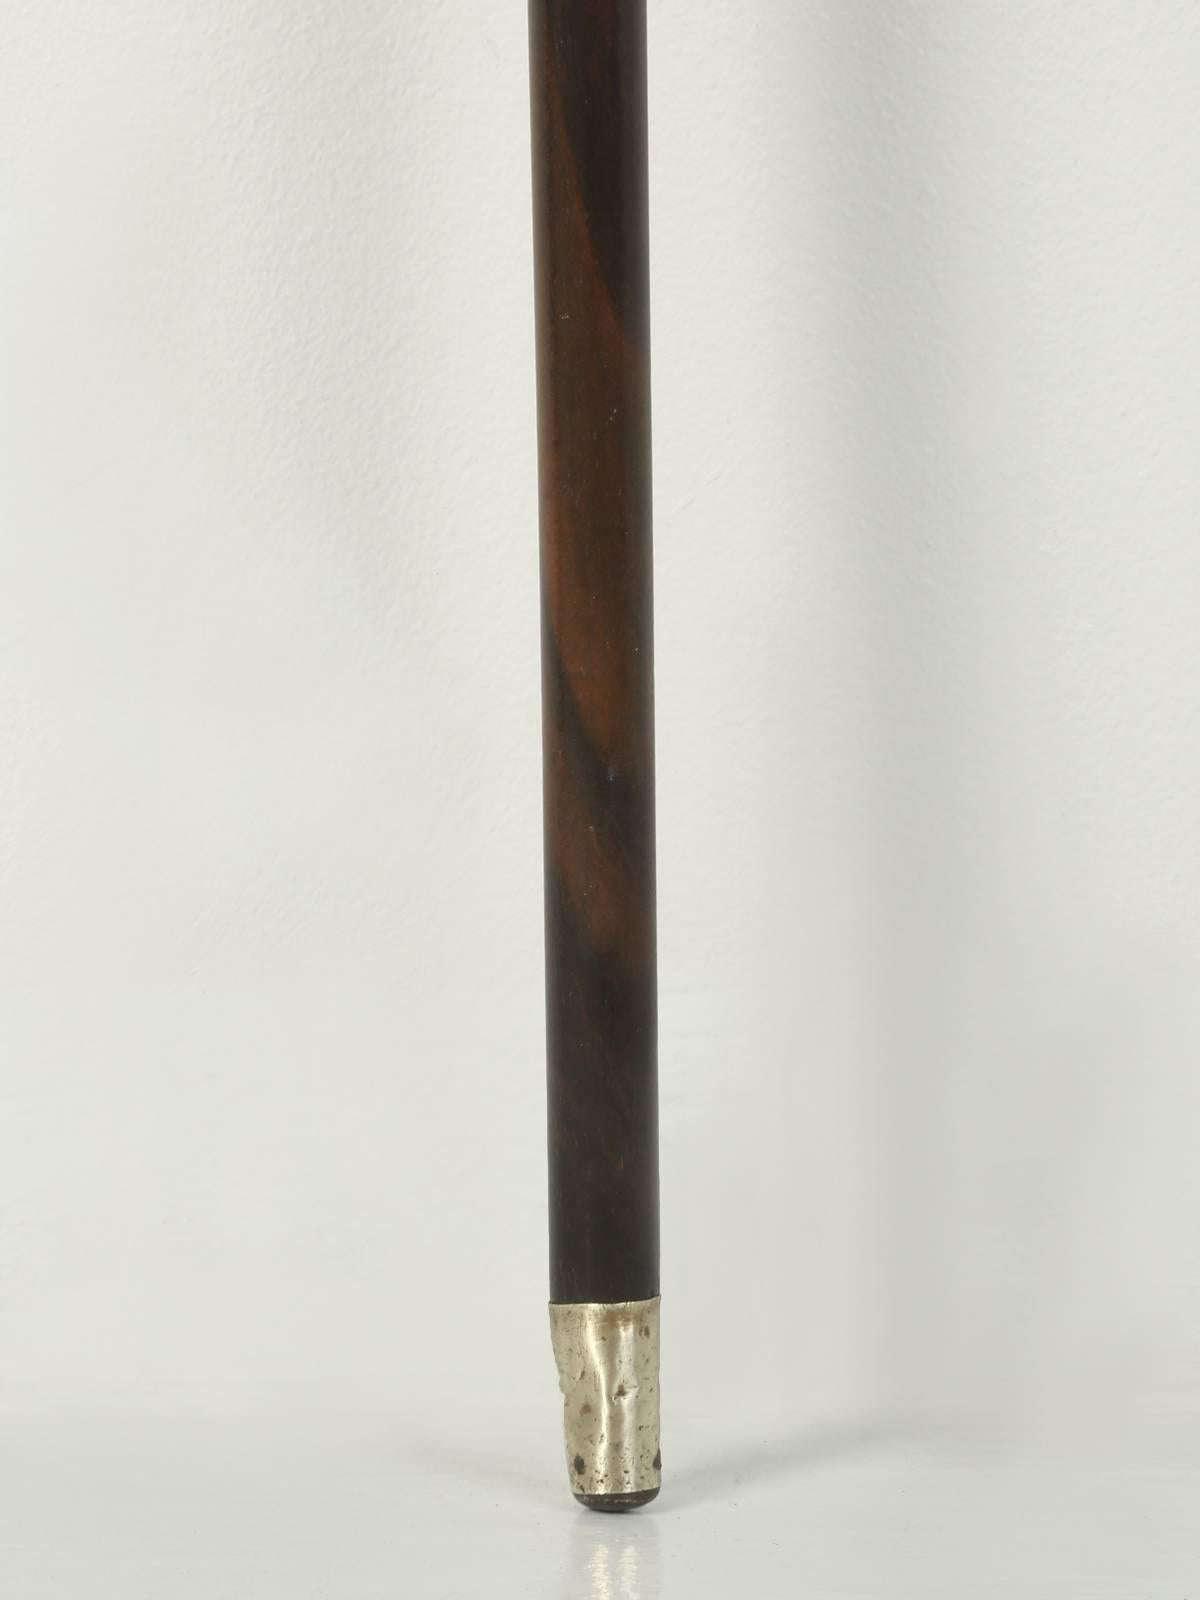 Early 20th Century Antique French Rosewood and Silver Walking Stick or Cane